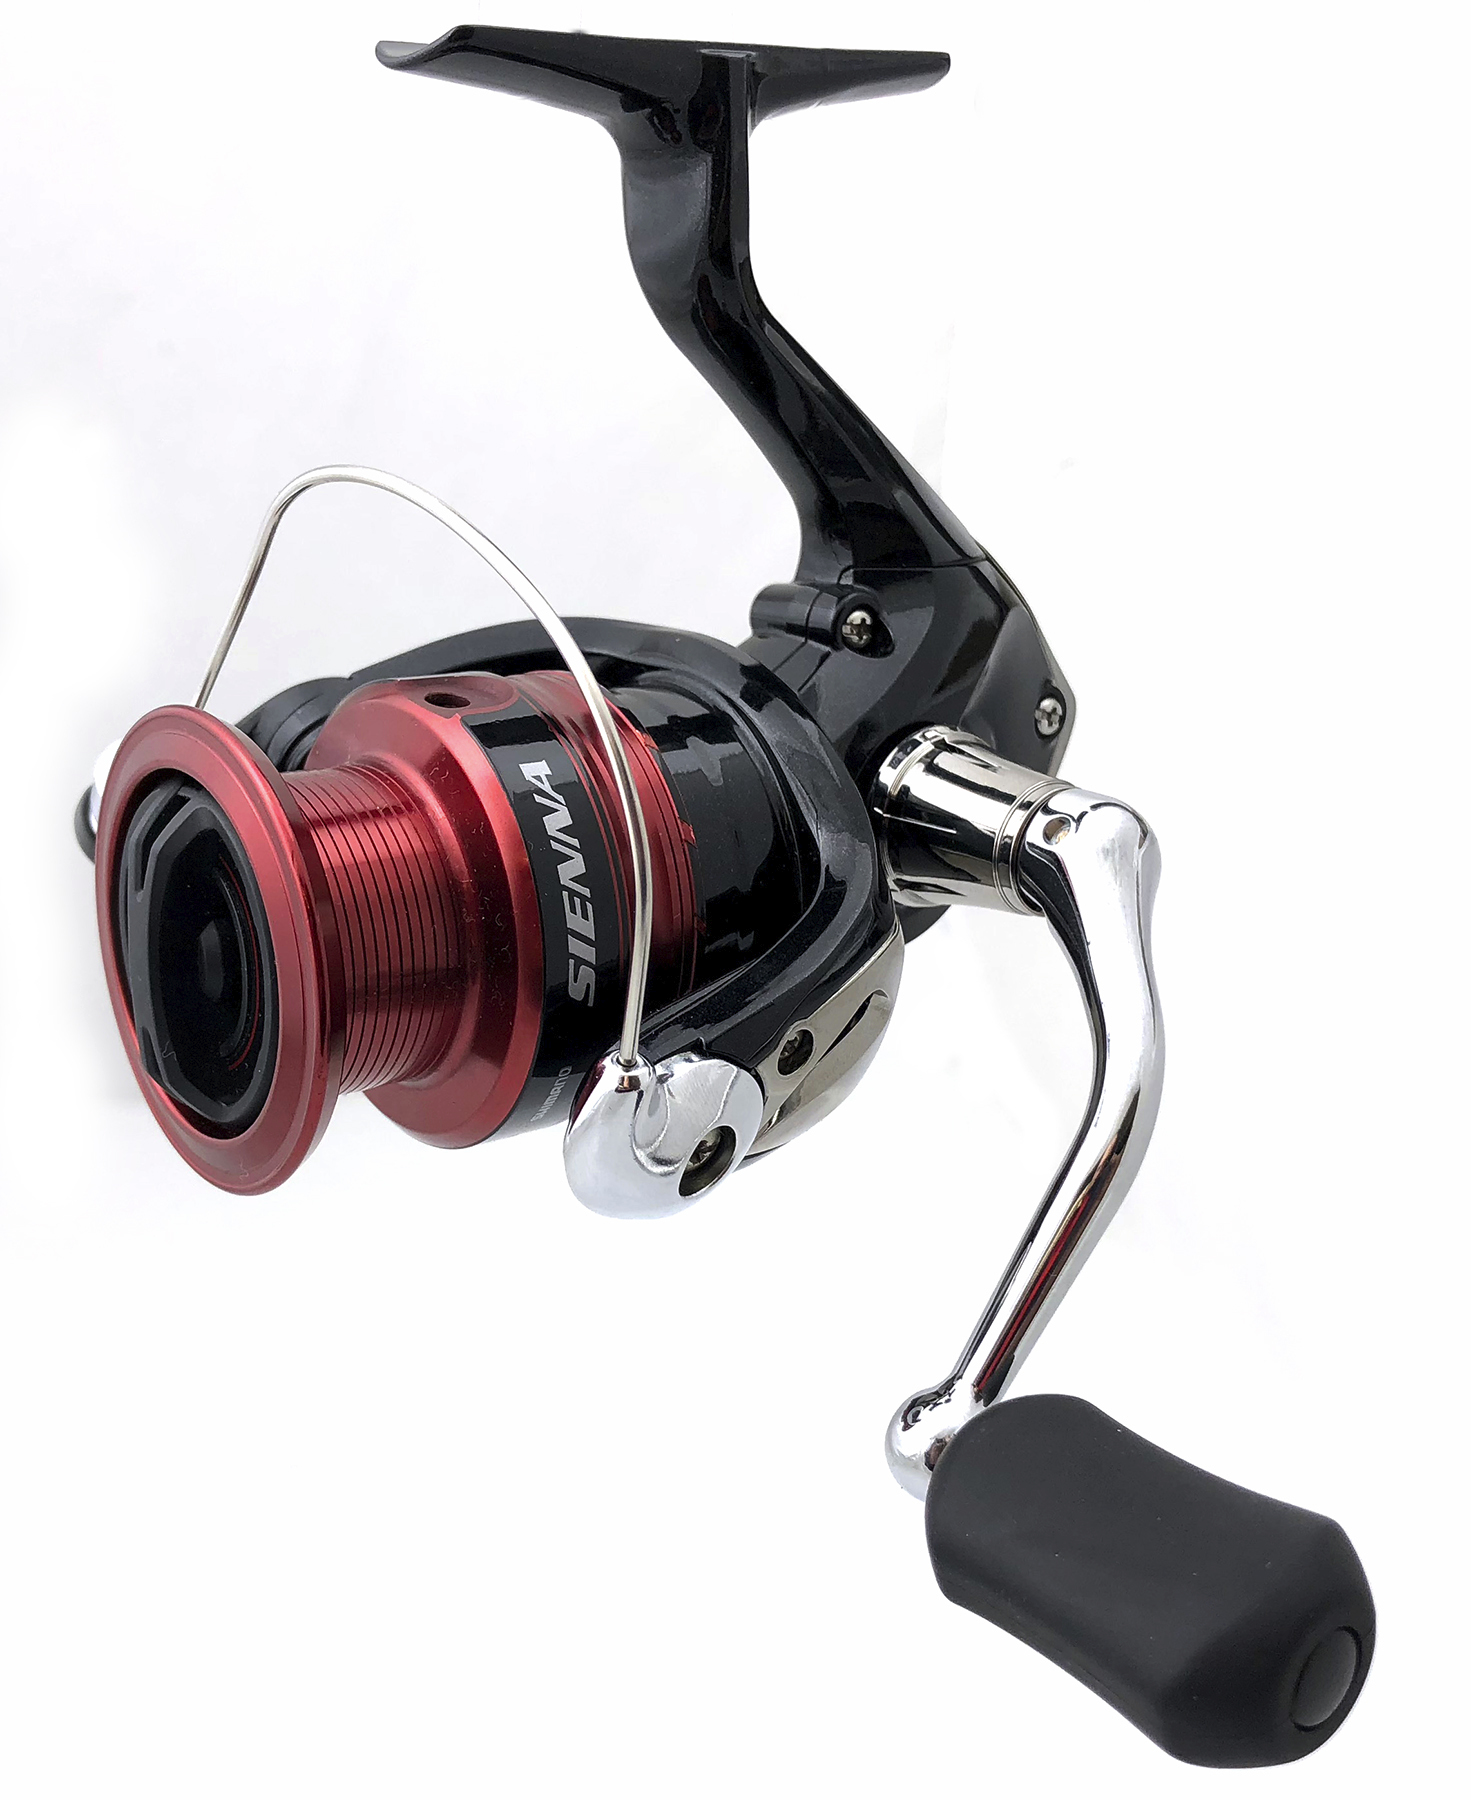 Shimano Sienna 500 Ultra Light Spinning Reel - Dick Smith's Live